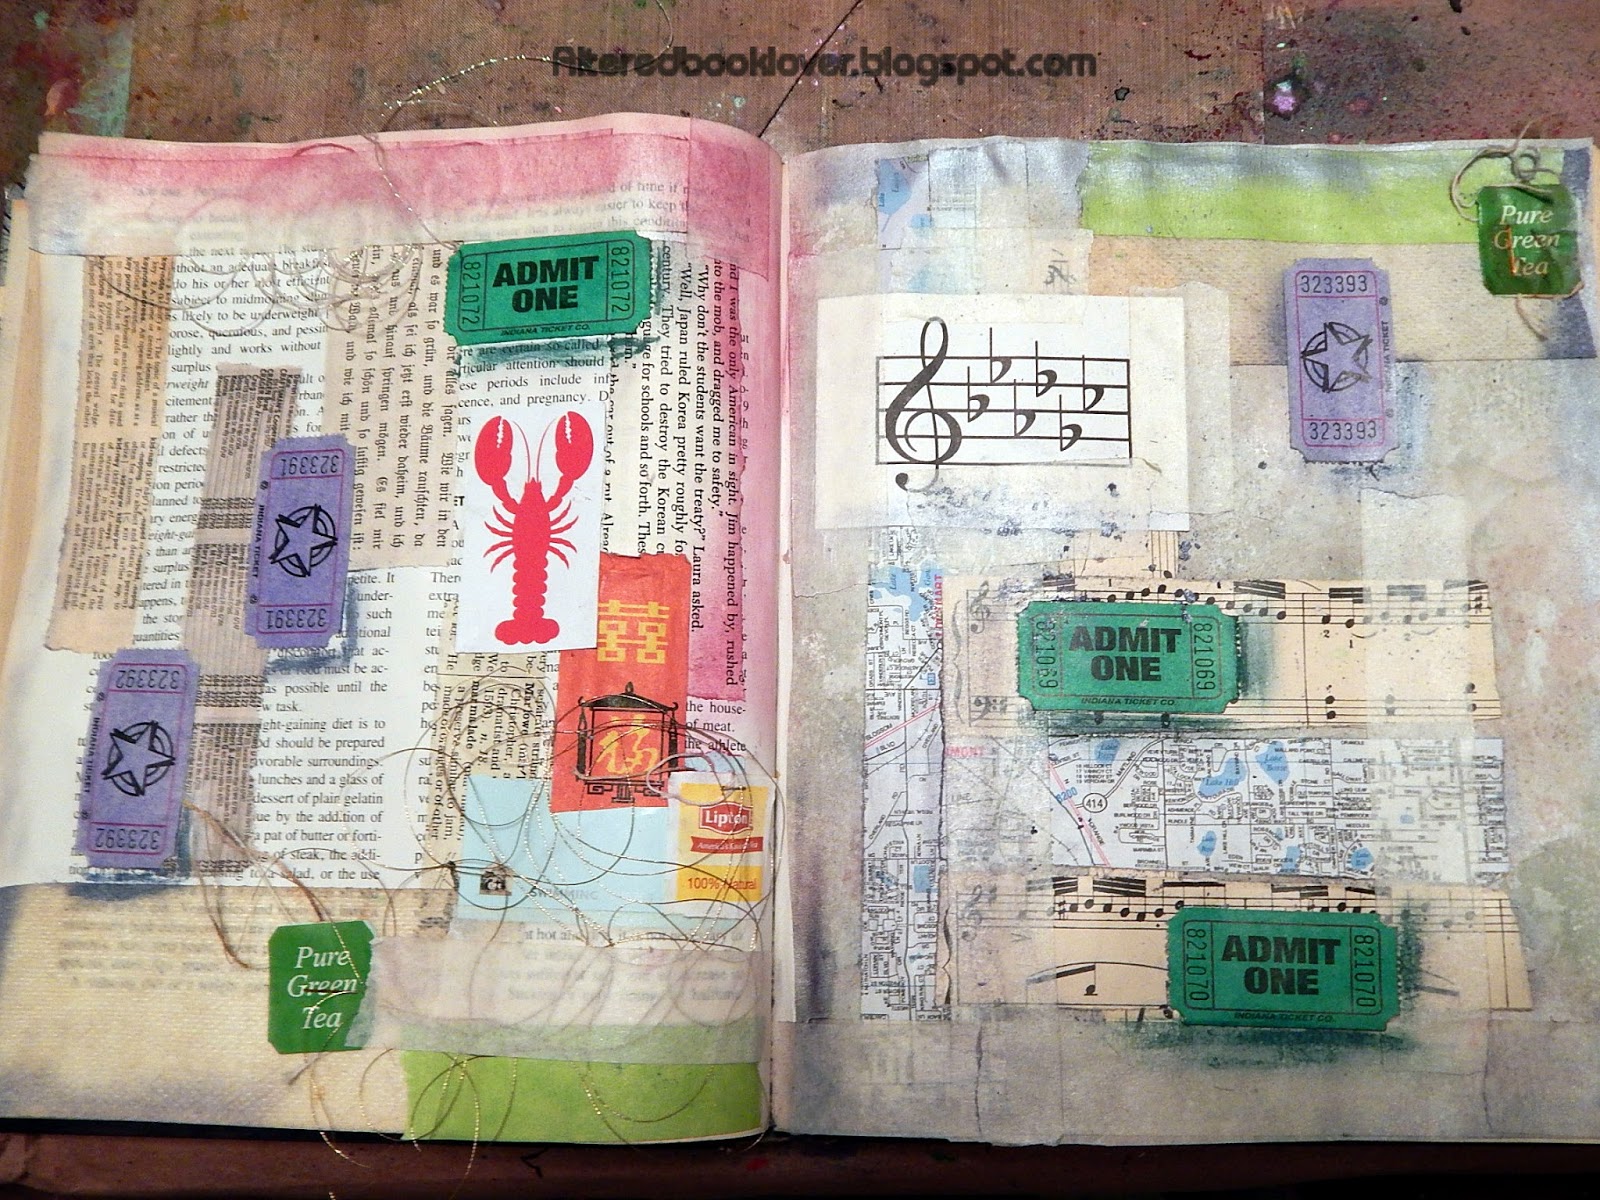 Altered Book Lover: Second Thursday Tutorial: A quick way to start making  handmade paper (hmp)